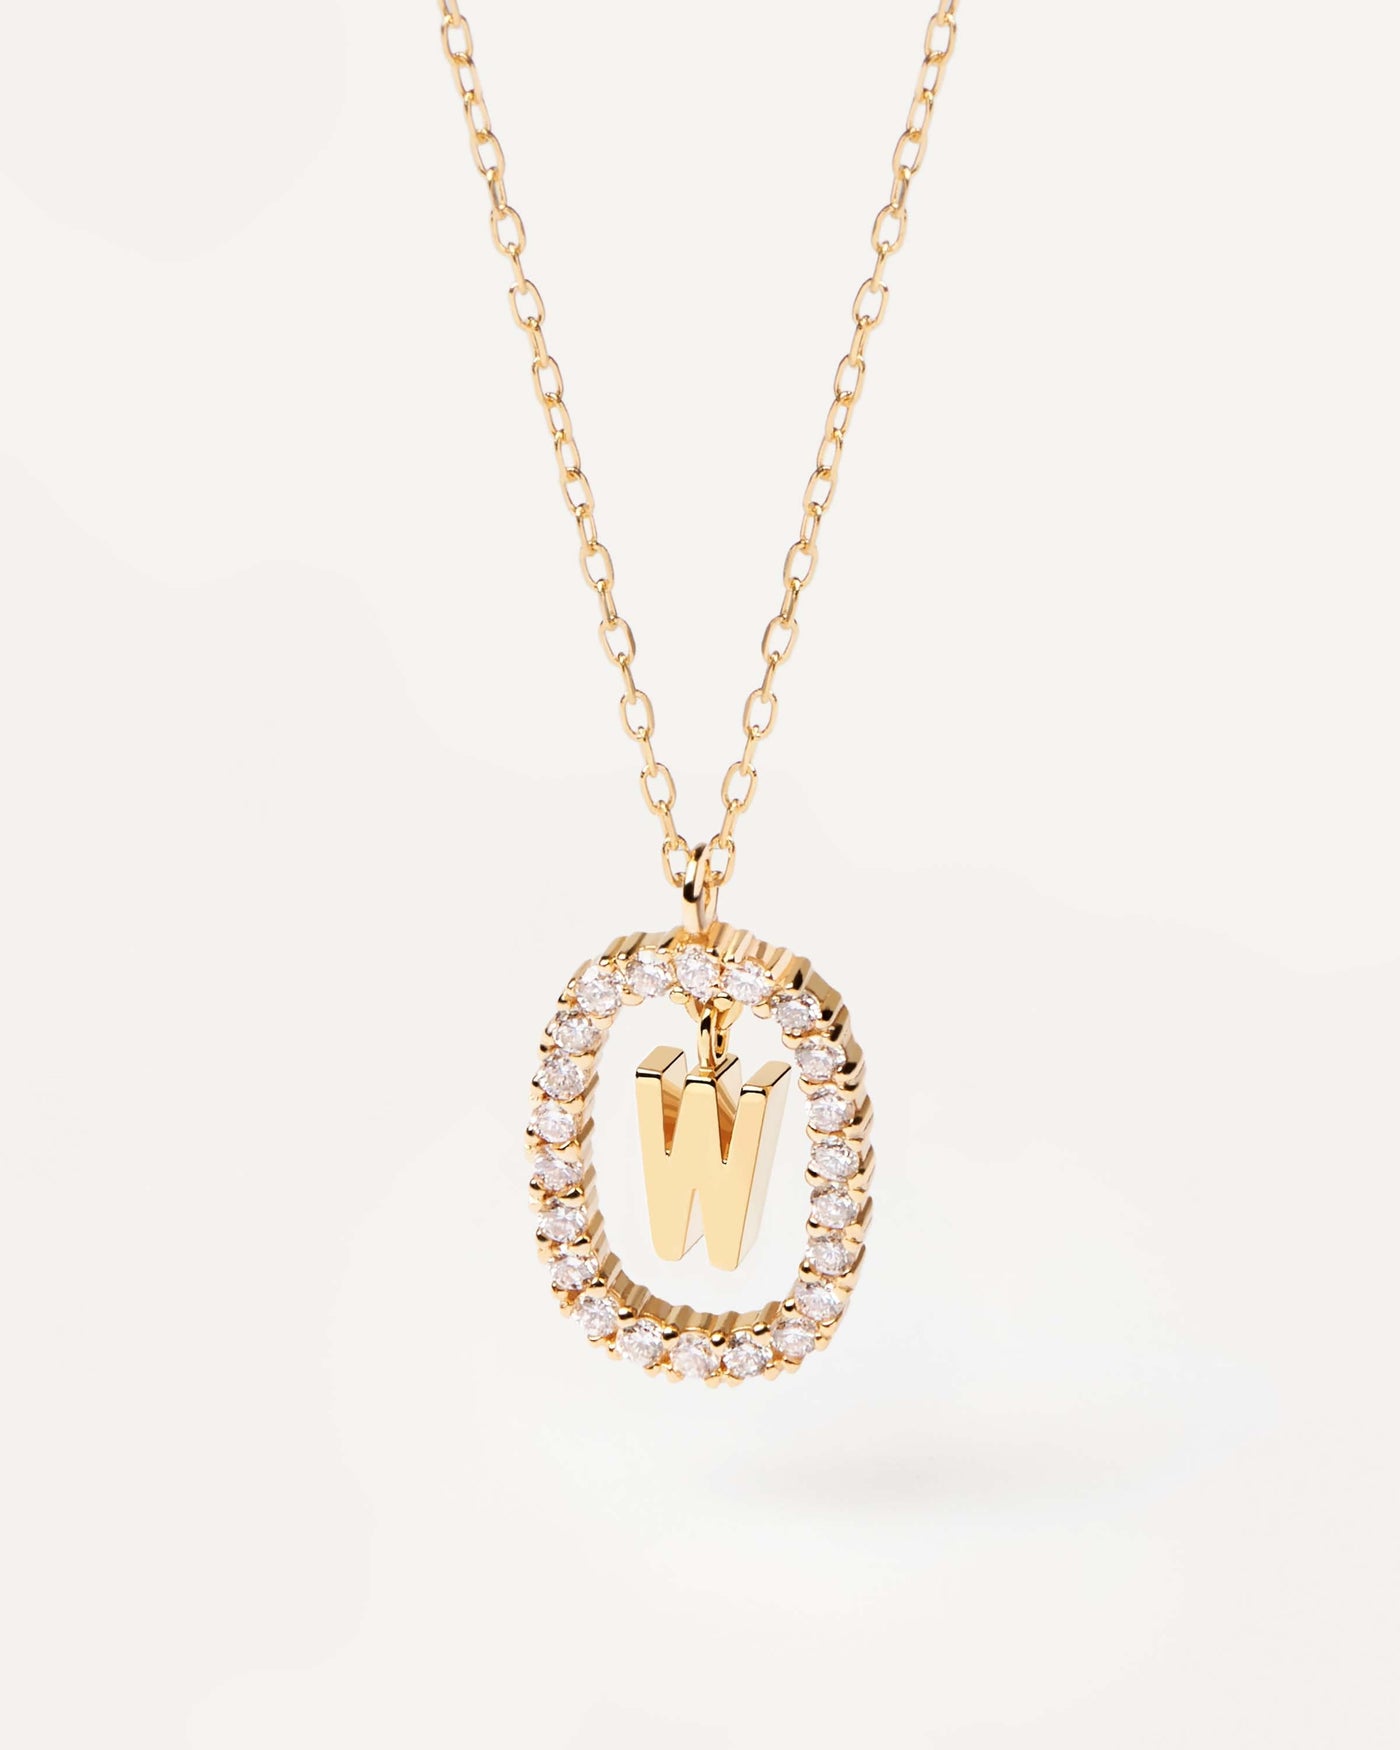 2024 Selection | Diamonds and Gold Letter W Necklace. Initial W necklace in solid yellow gold, circled by 0.33 carats lab-grown diamonds. Get the latest arrival from PDPAOLA. Place your order safely and get this Best Seller. Free Shipping.